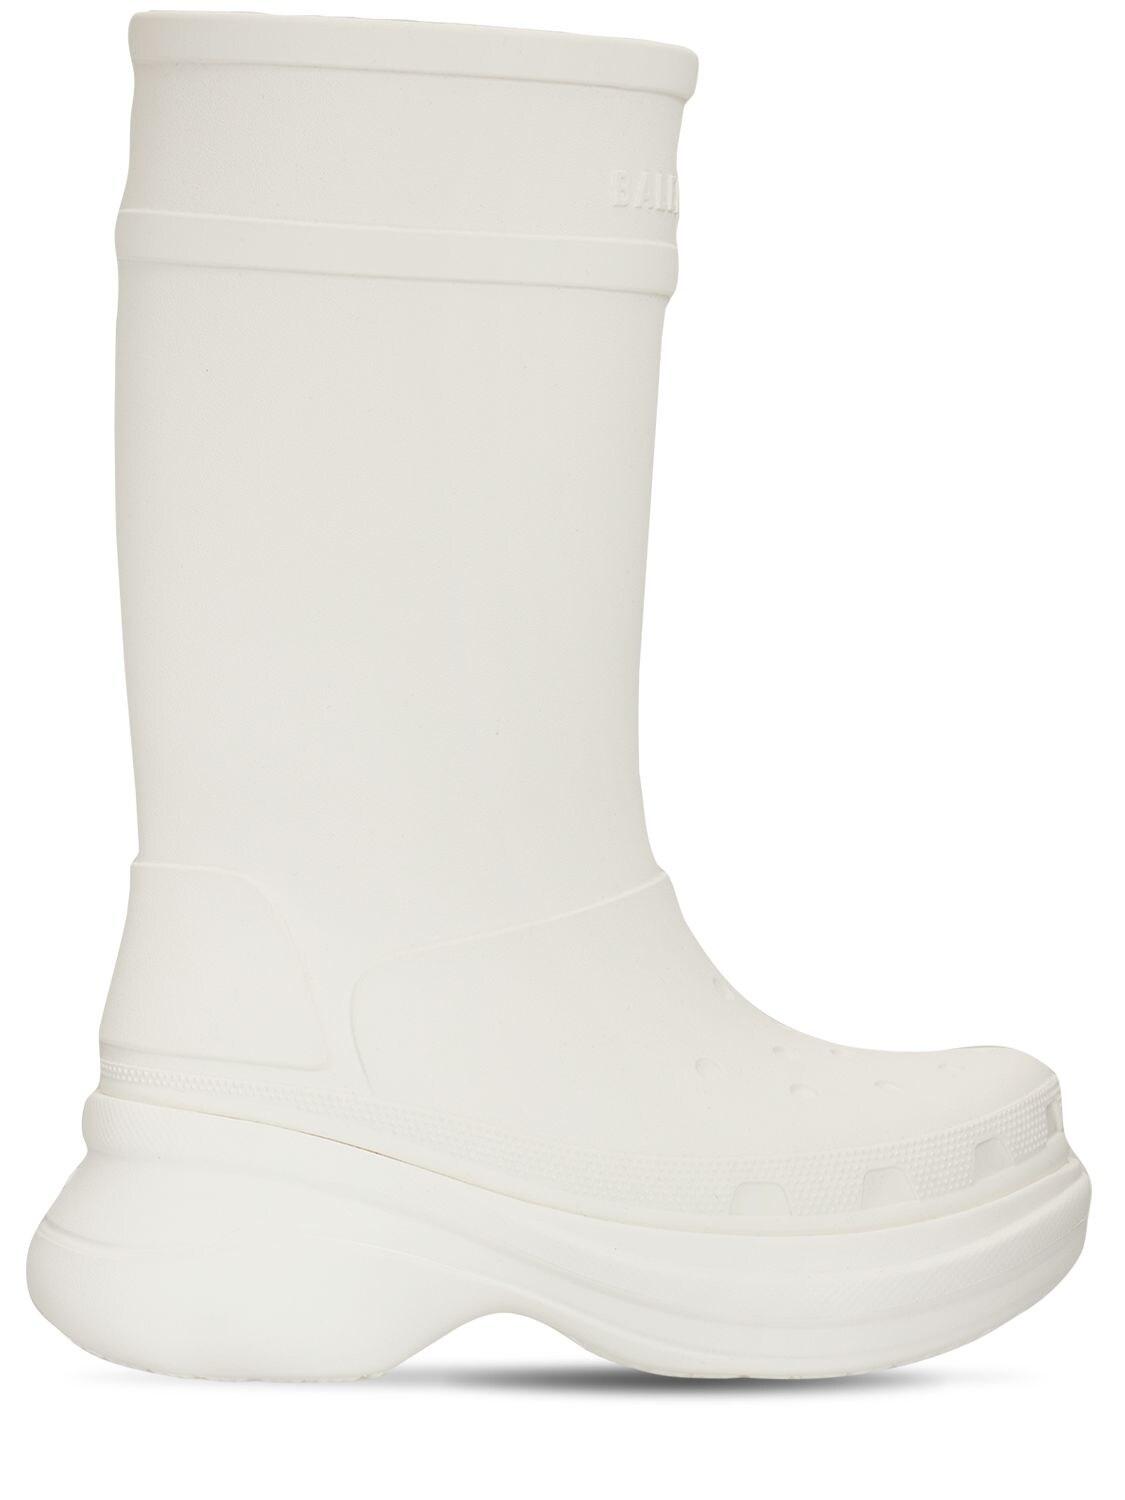 Balenciaga Crocs Rubber Boots in White - Save 22% | Lyst